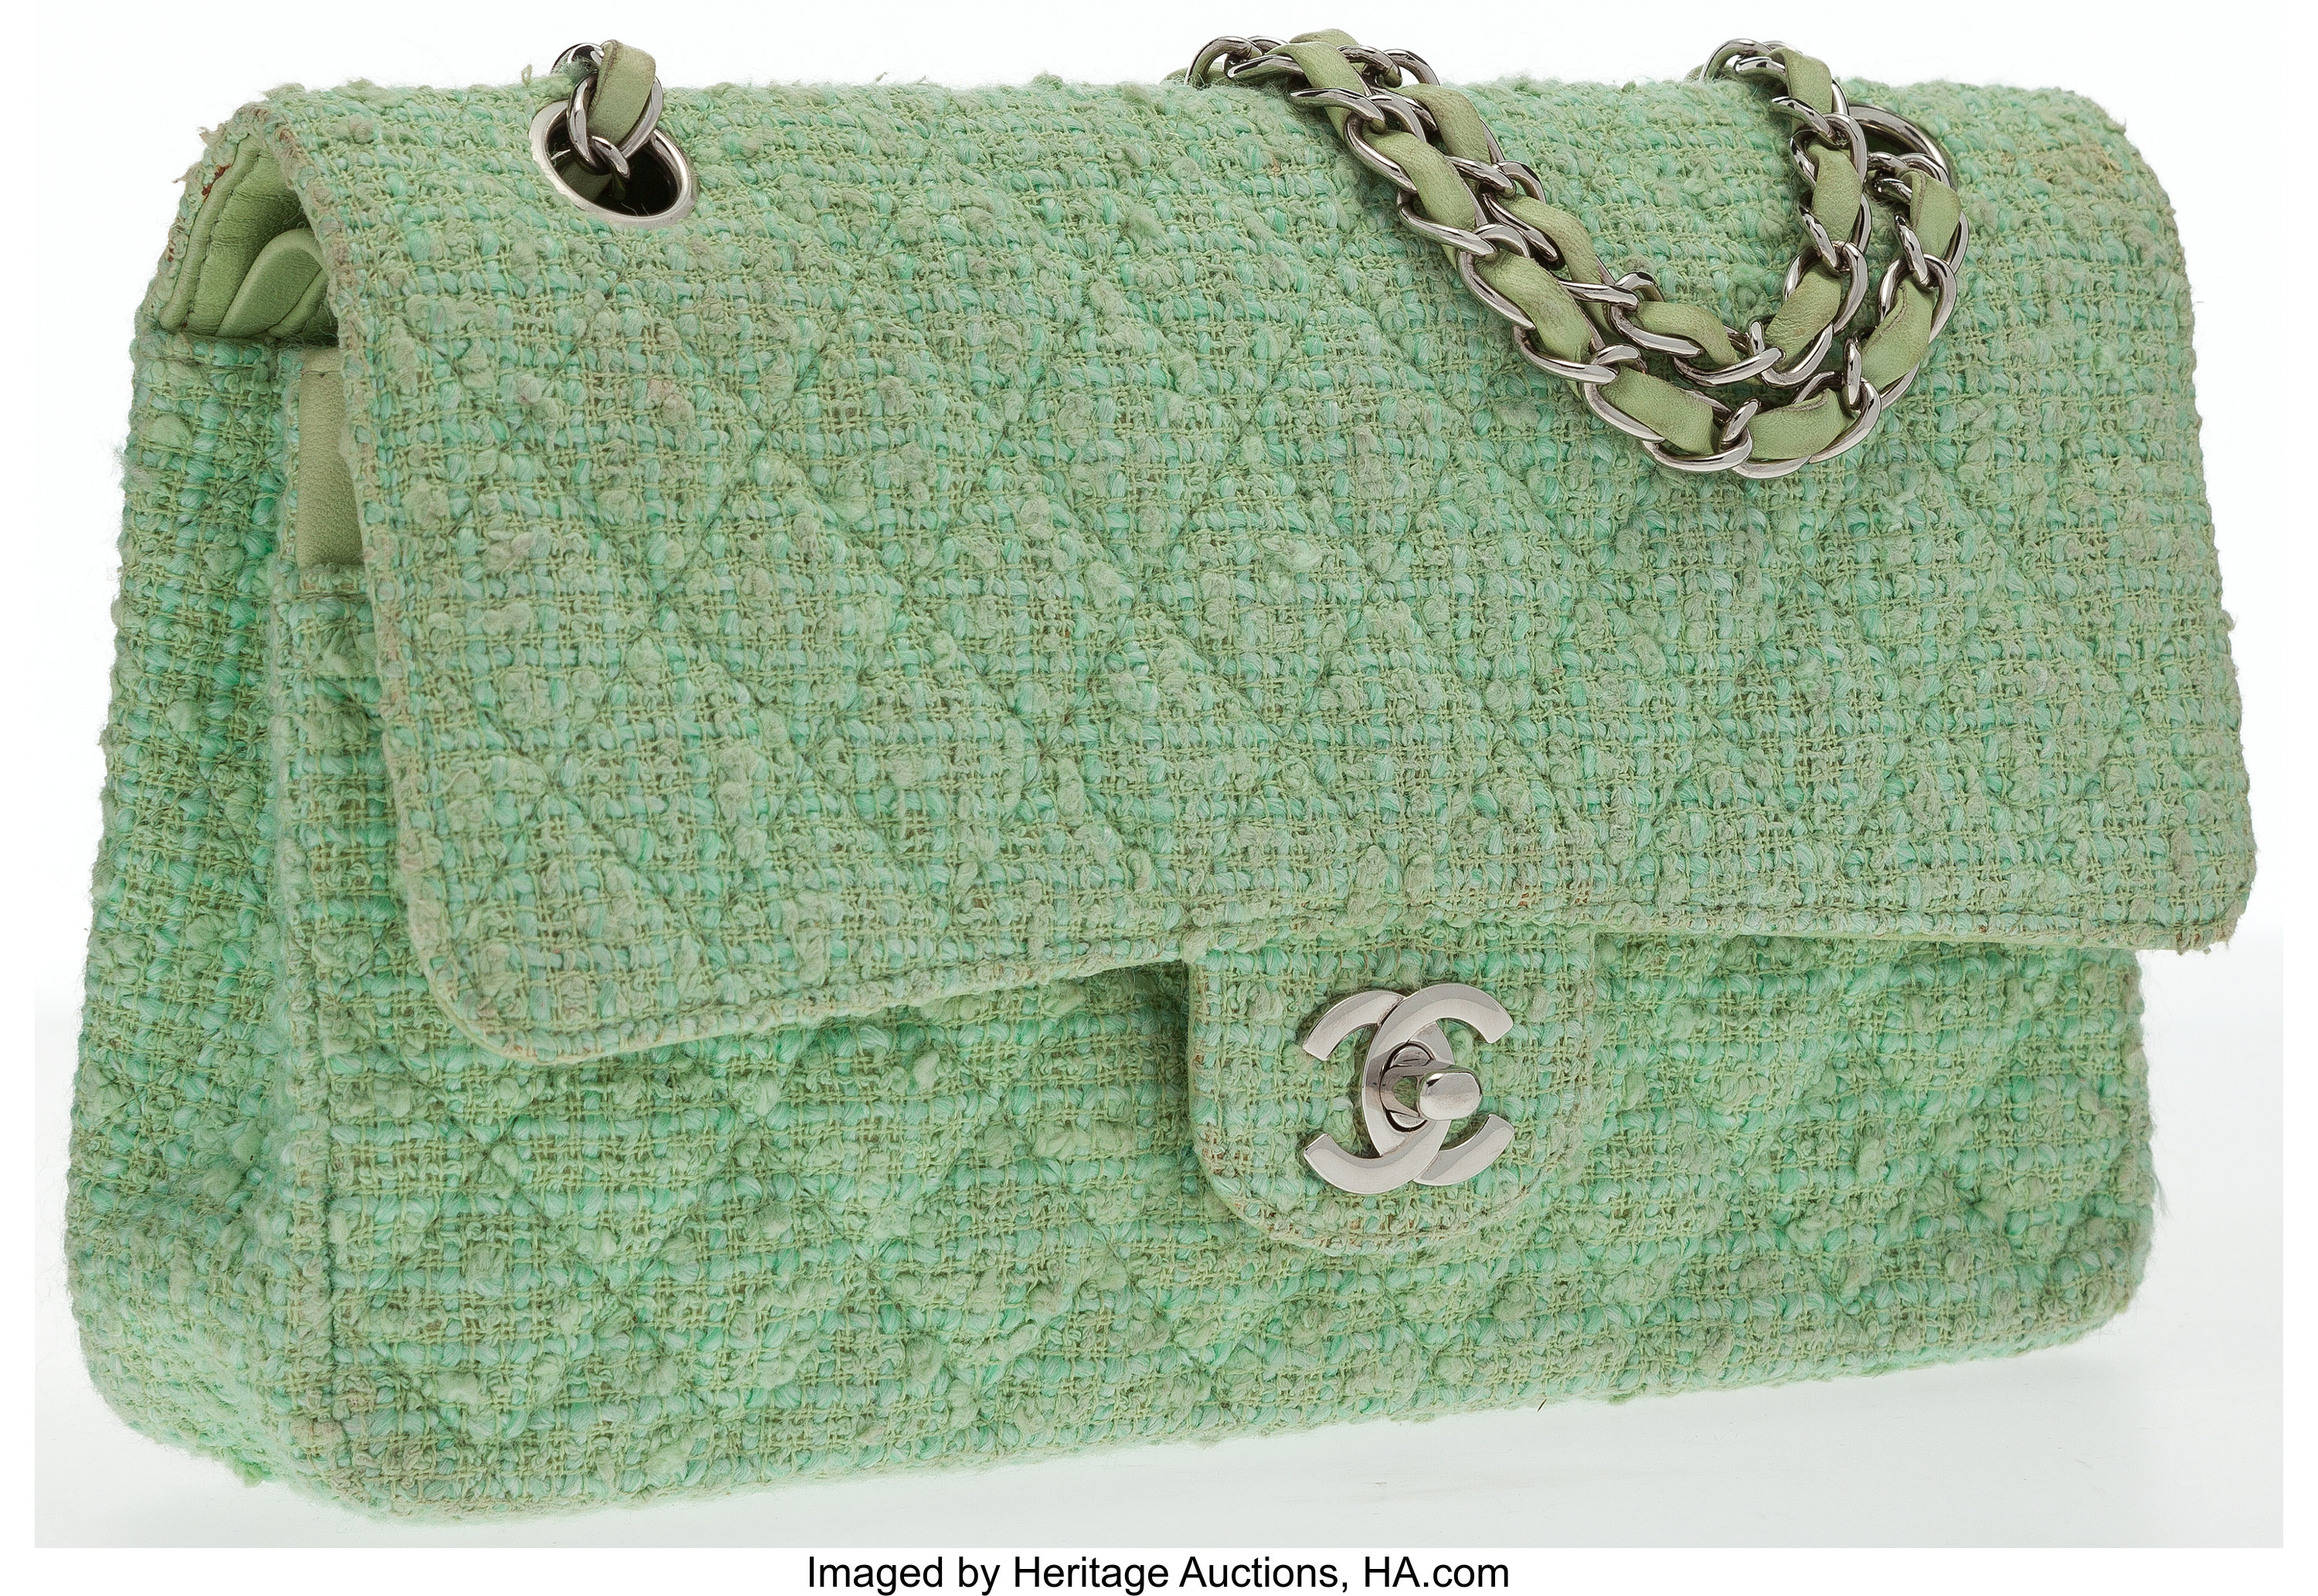 Chanel Green Tweed Medium Double Flap Bag with Silver Hardware., Lot  #18002